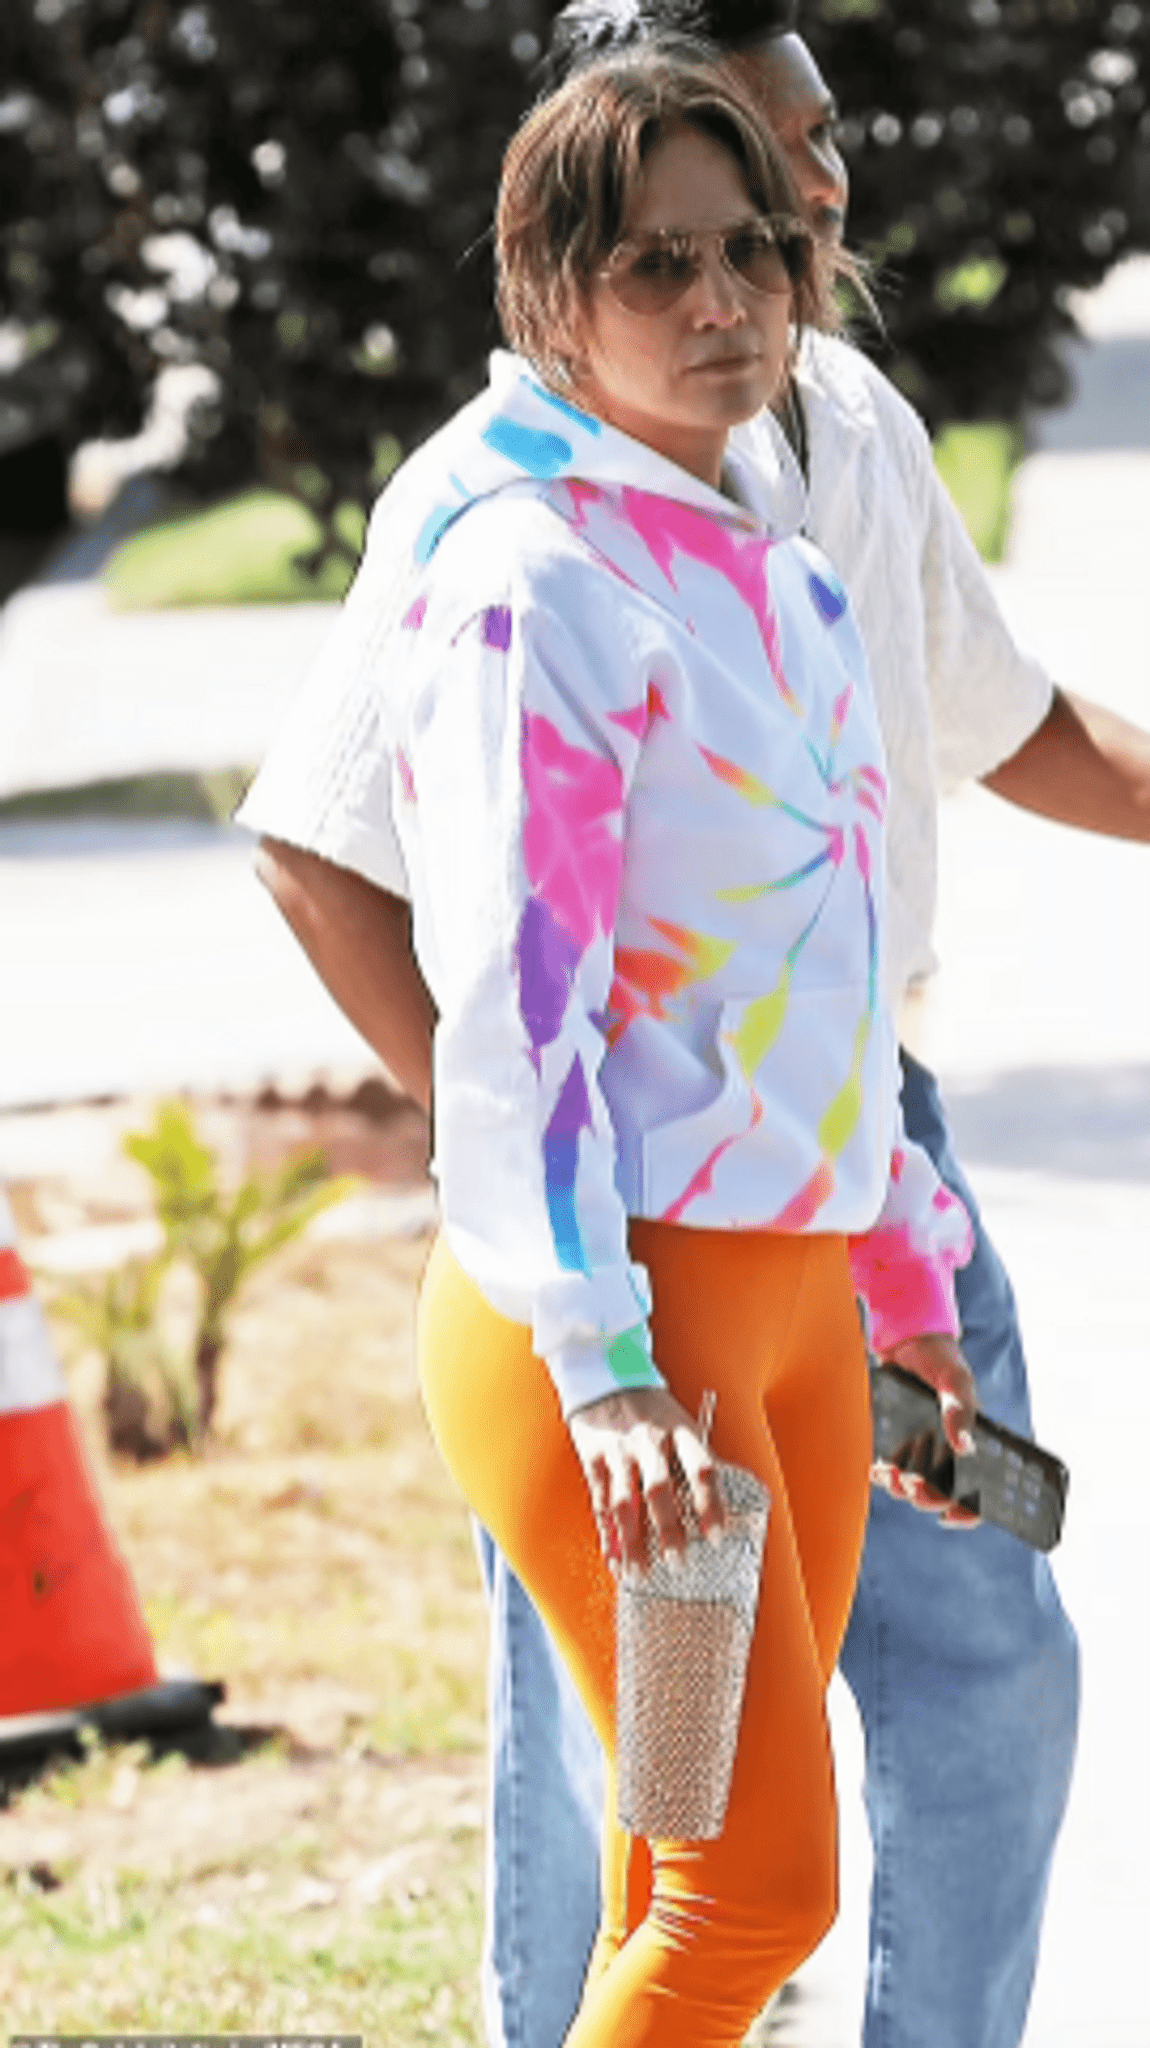 ”jennifer-lopez-wears-orange-leggings-to-show-her-love-for-cheerful-colors”